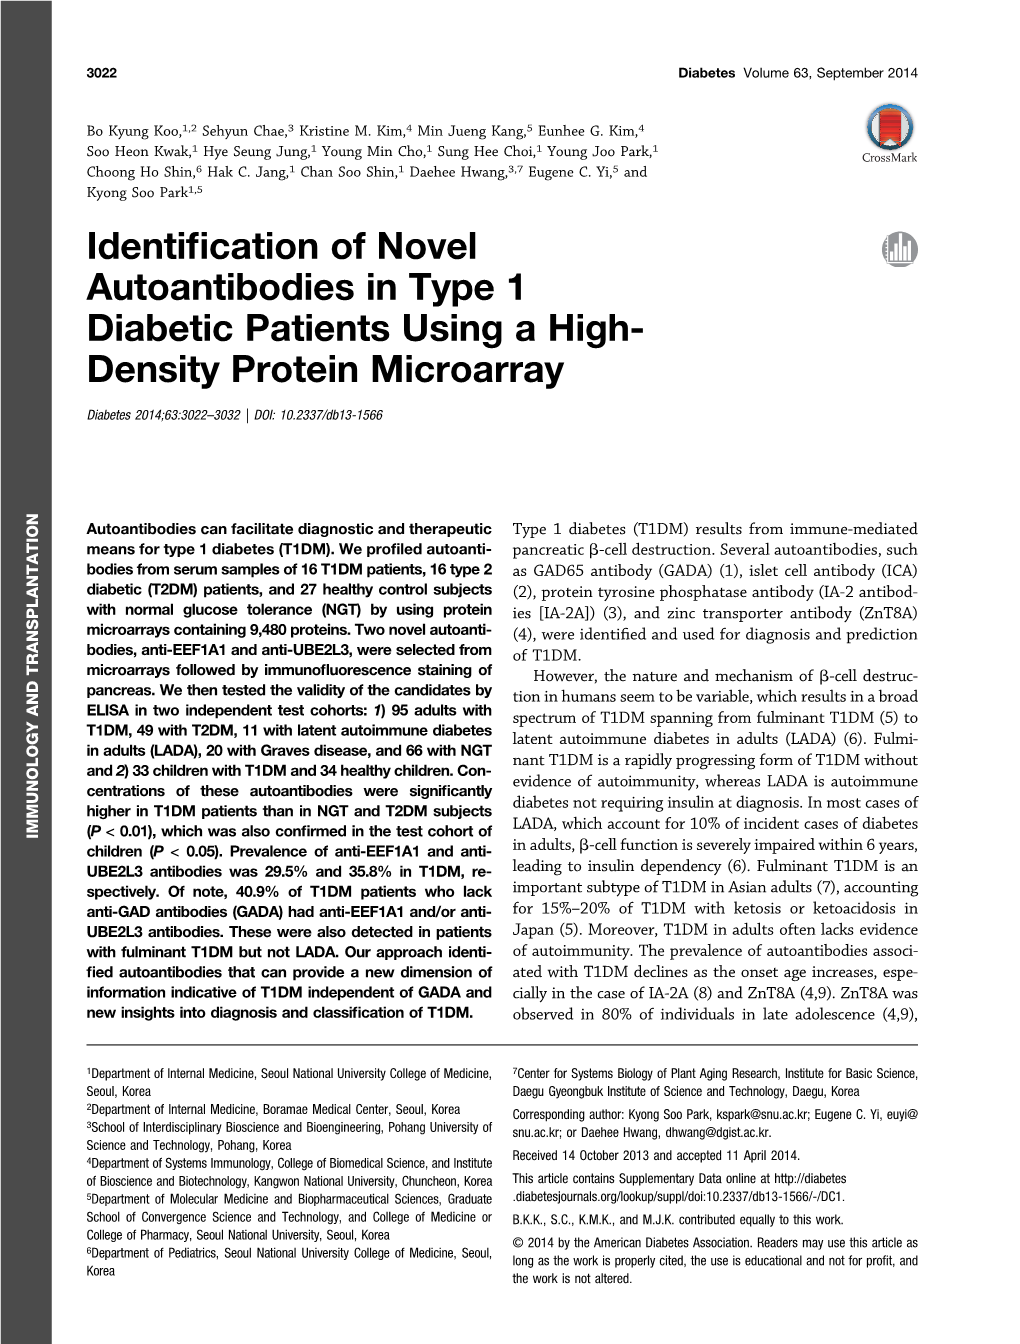 Identification of Novel Autoantibodies in Type 1 Diabetic Patients Using A